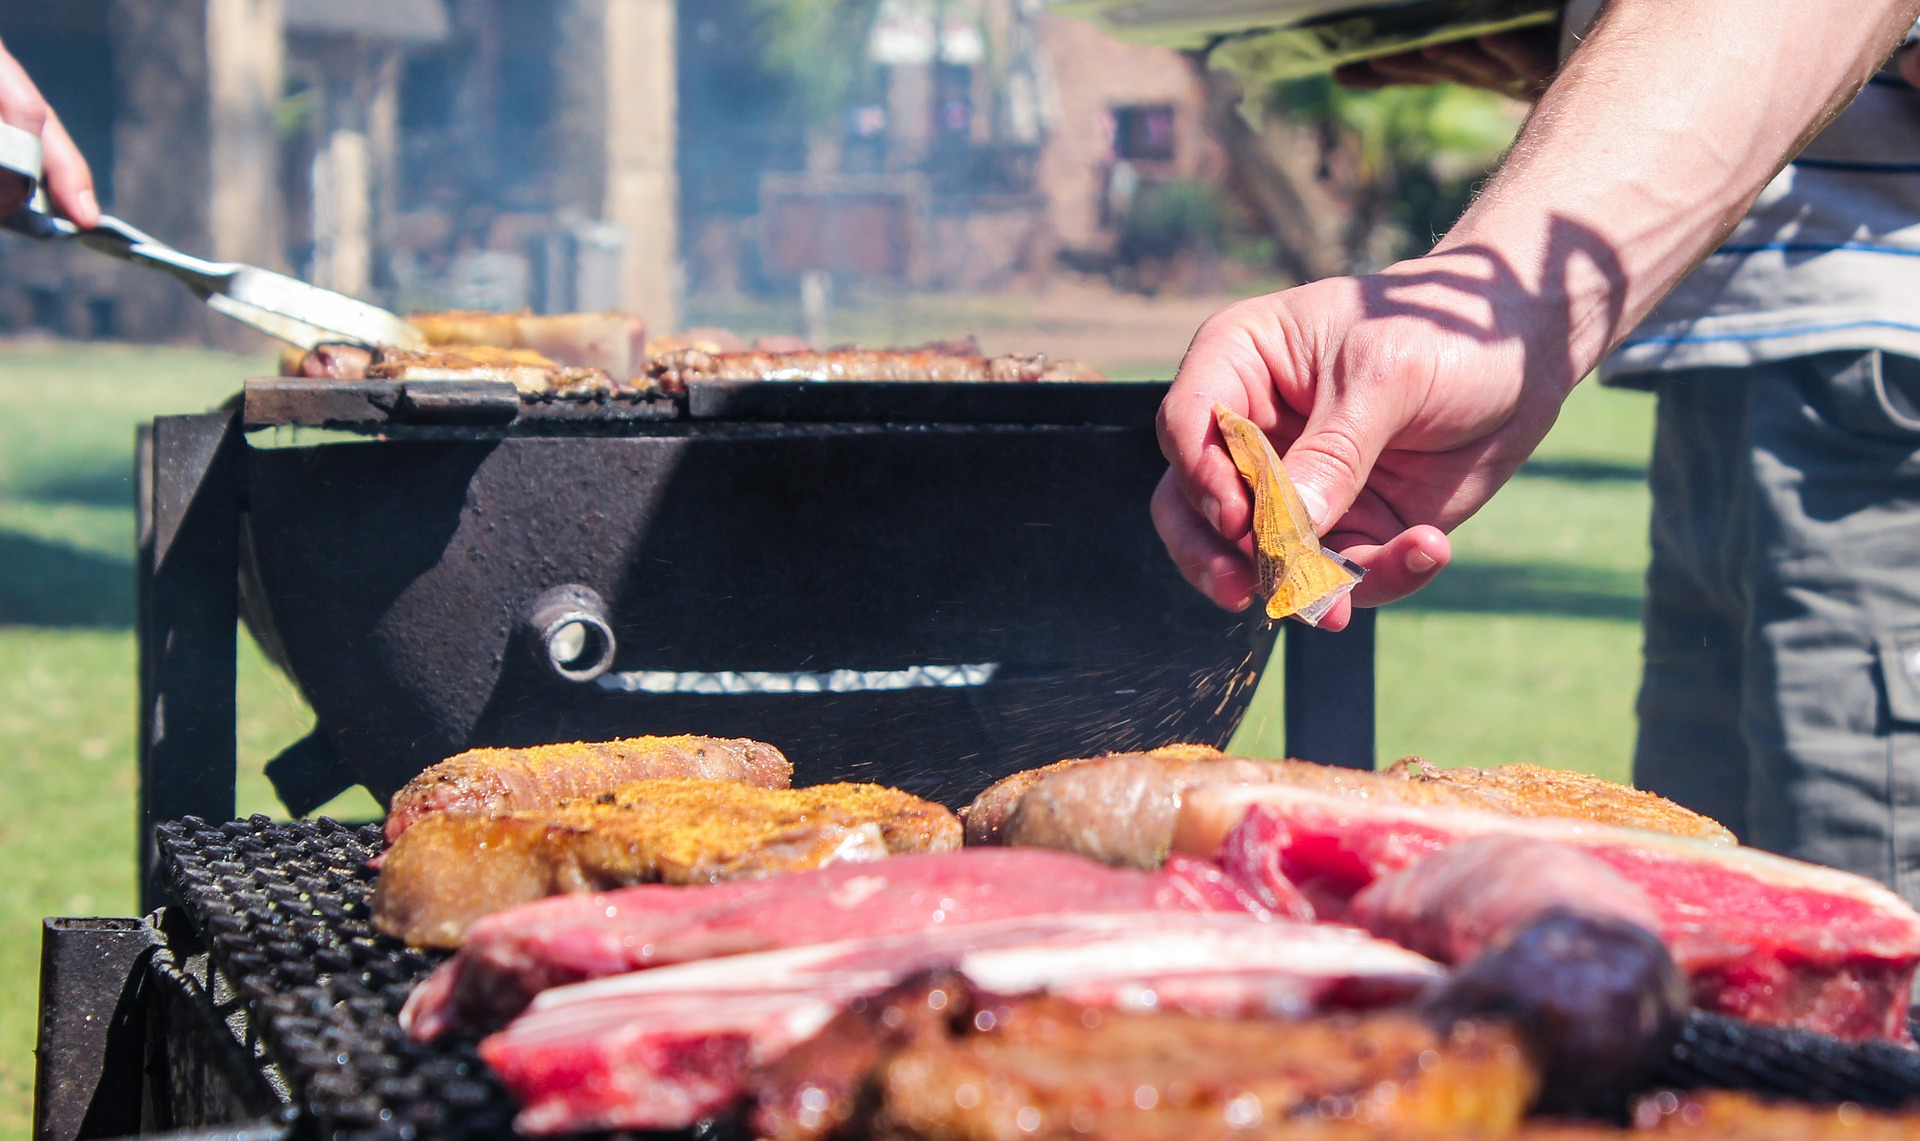 Easy Ways To Have A Backyard Barbecue Without Starting A Fire